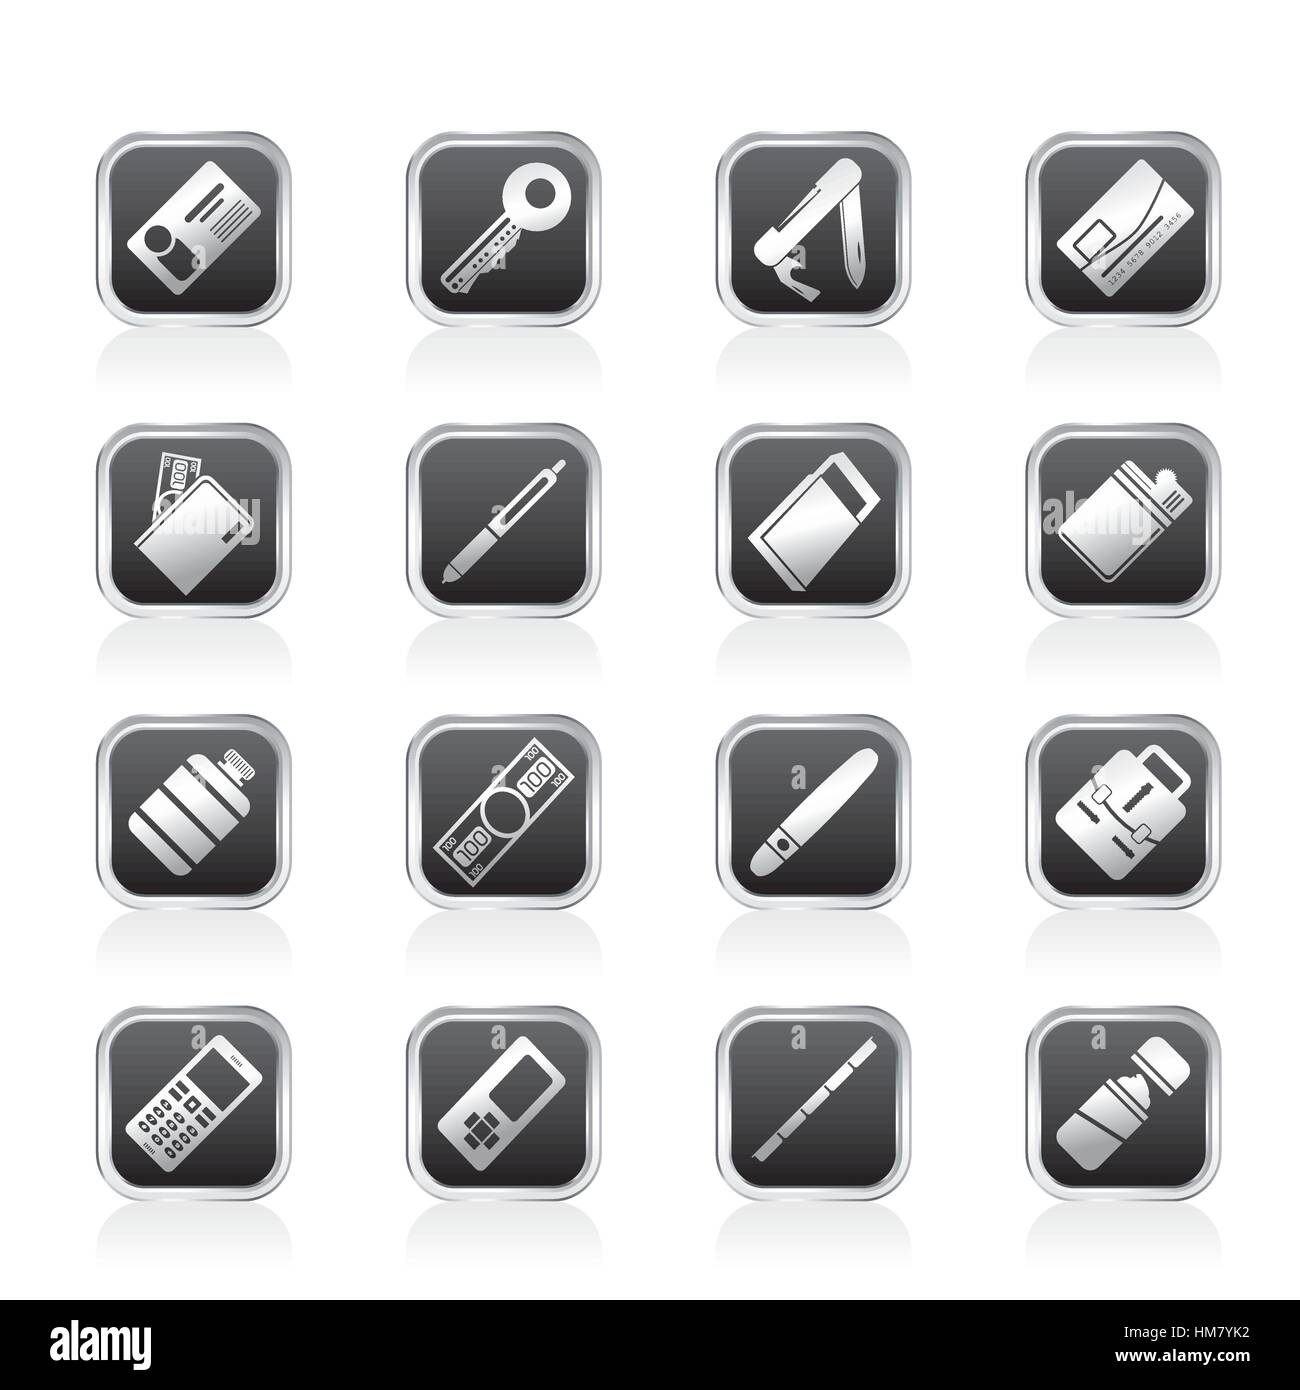 Simple Vector Object Icons - Vector Icon Set Stock Vector